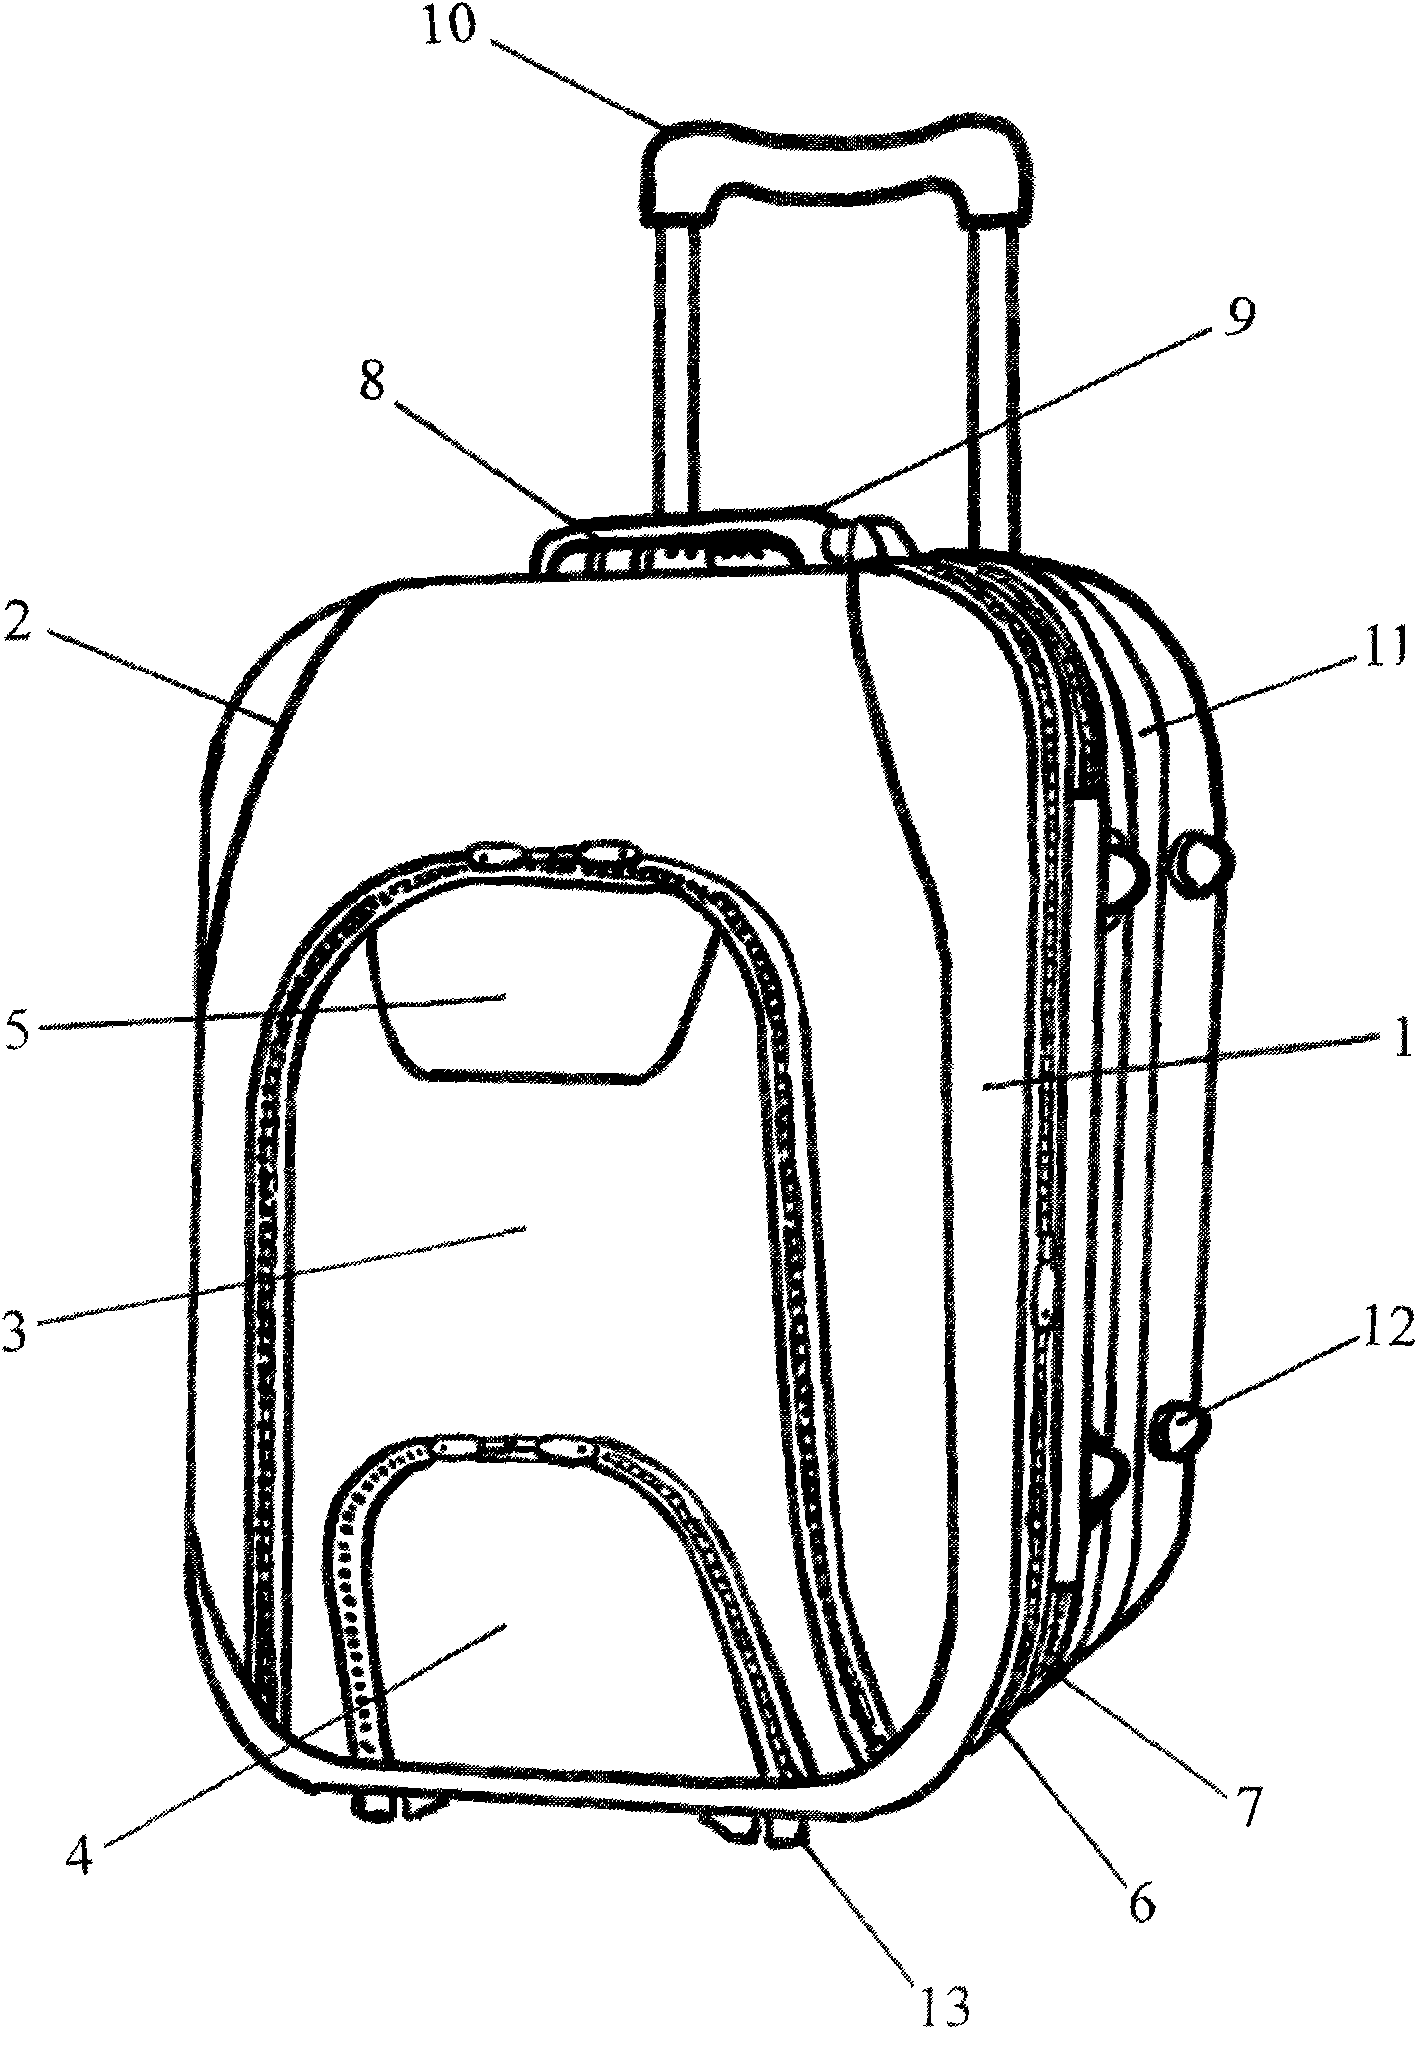 Draw-bar box provided with big and small supporting legs and small convex bag superposed on big convex bag